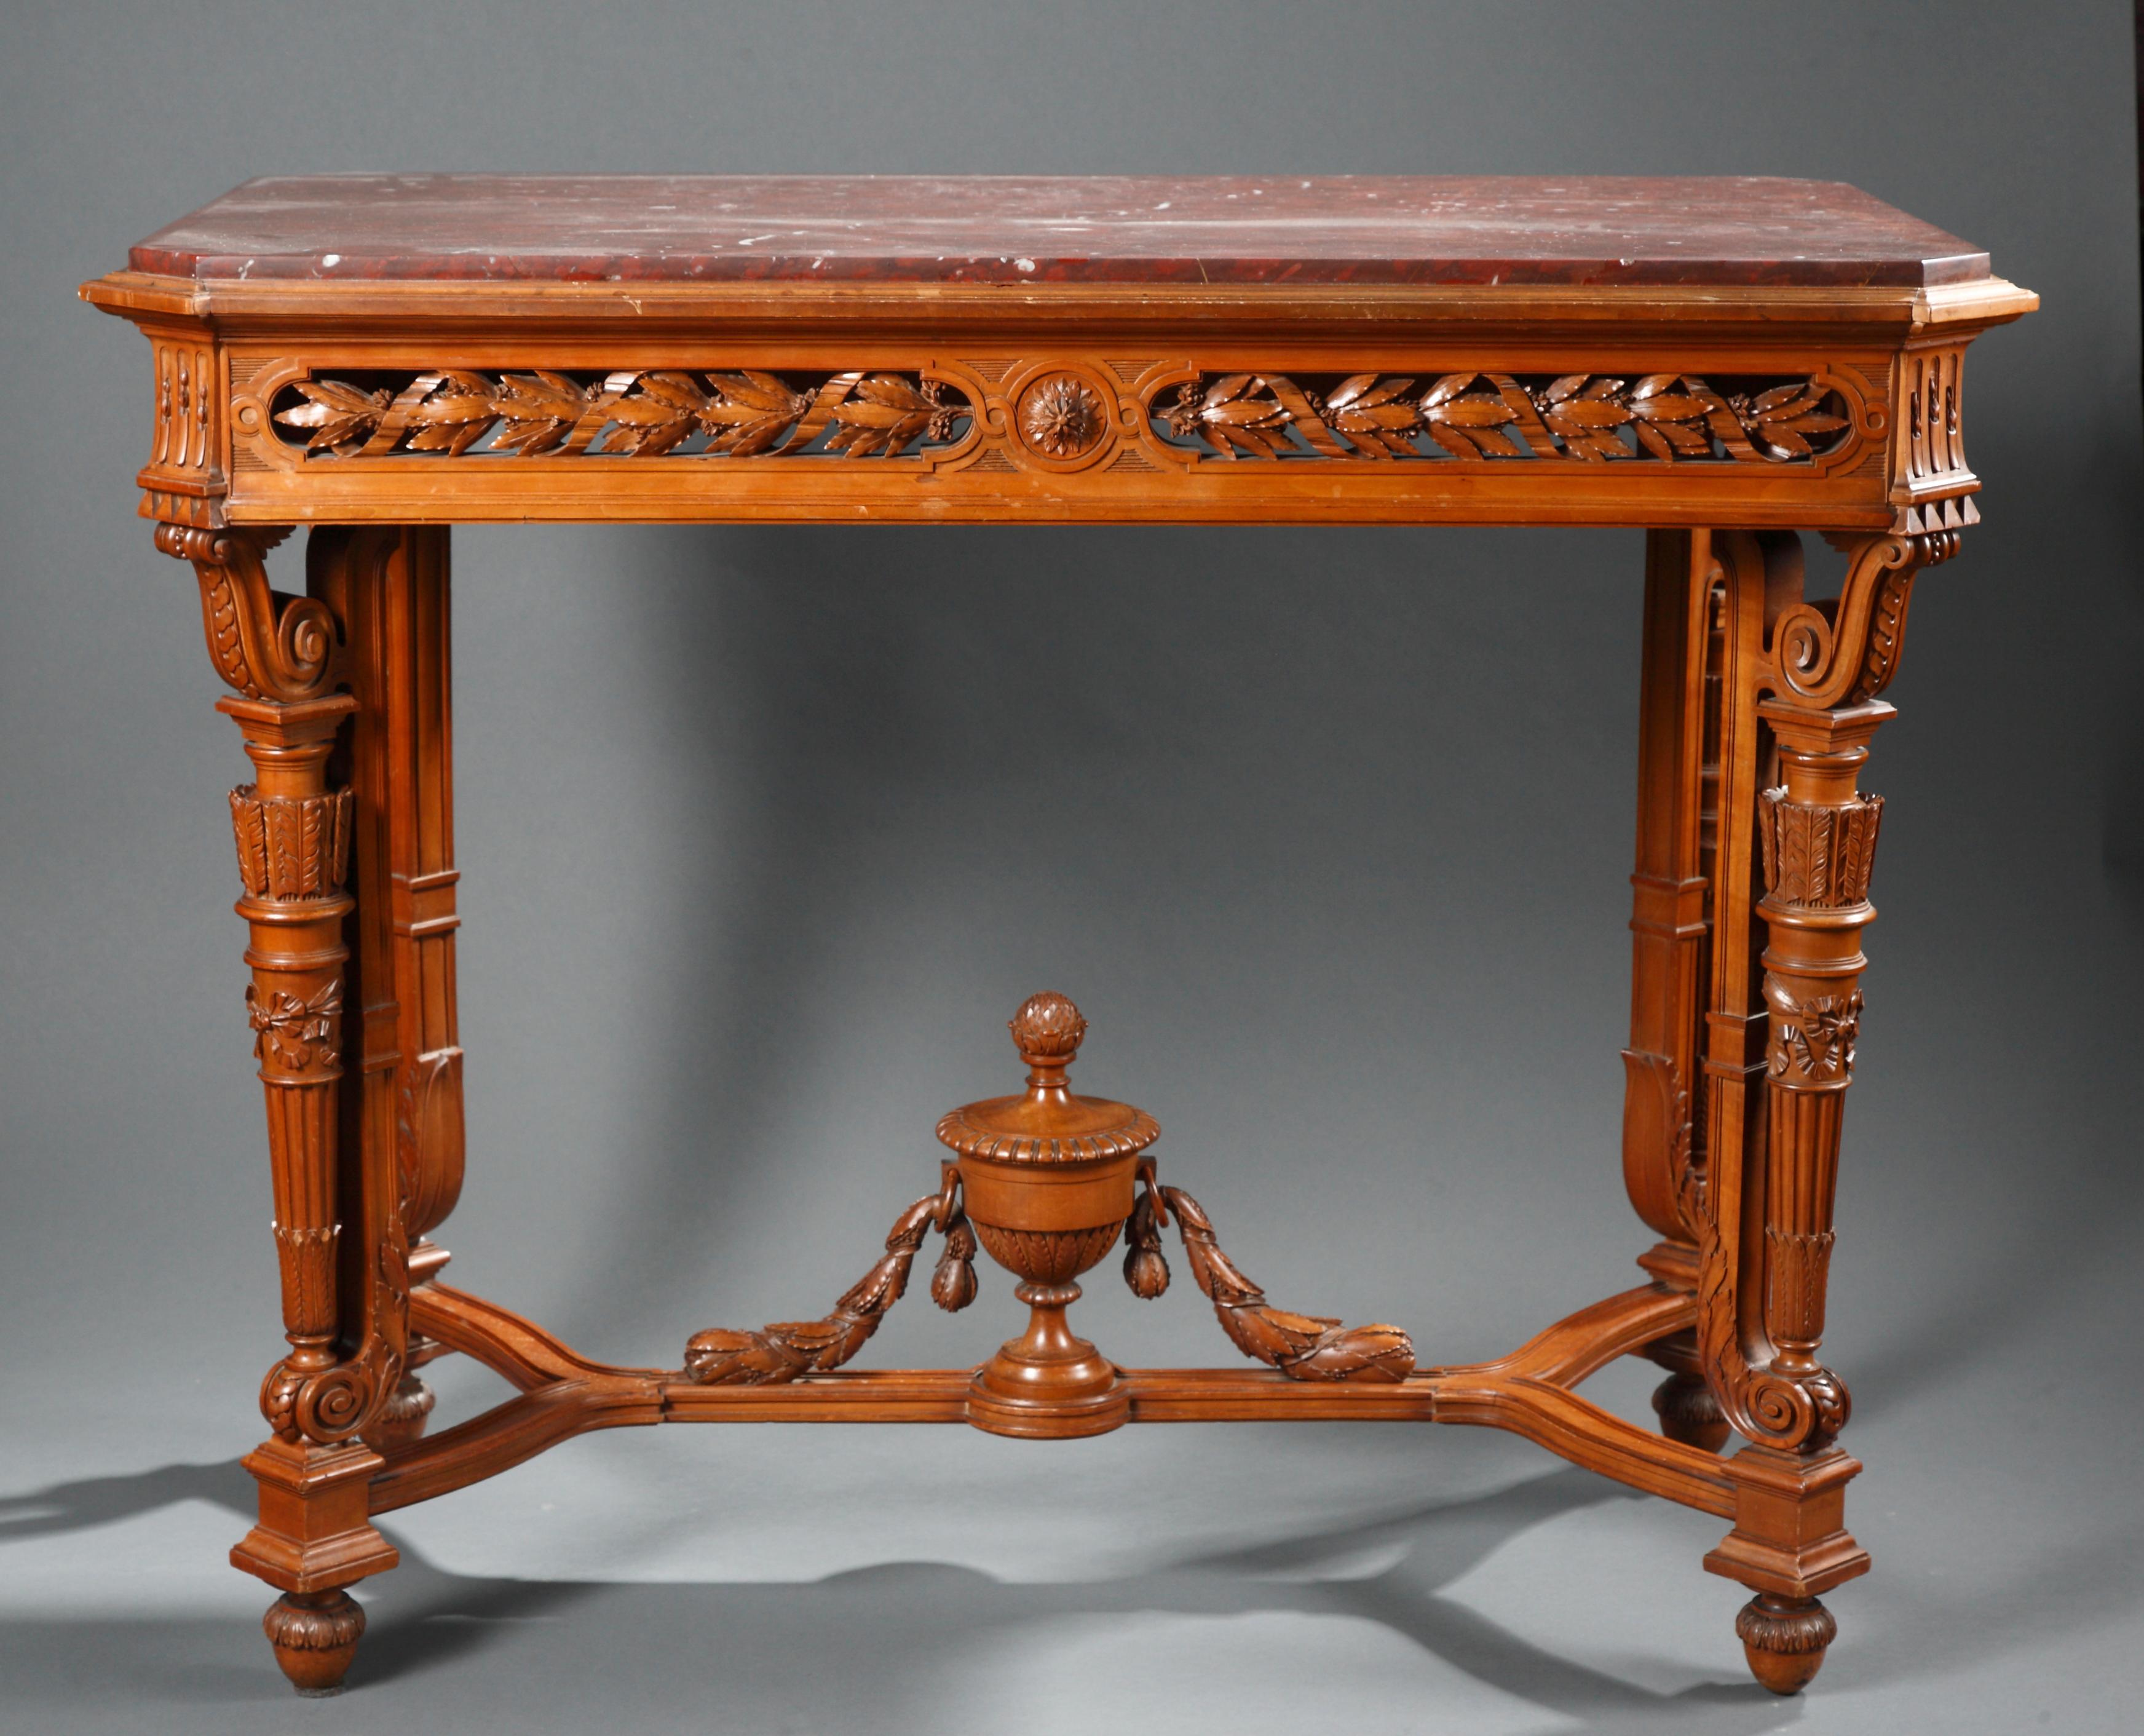 Center table made exclusively in richly carved wood and attributed to A.E. Beurdeley ; with a fine pierced belt ornamented with laurel branches. Raised on four legs joined by a stretcher, centered by a carved wood vase. Topped with a red Griotte